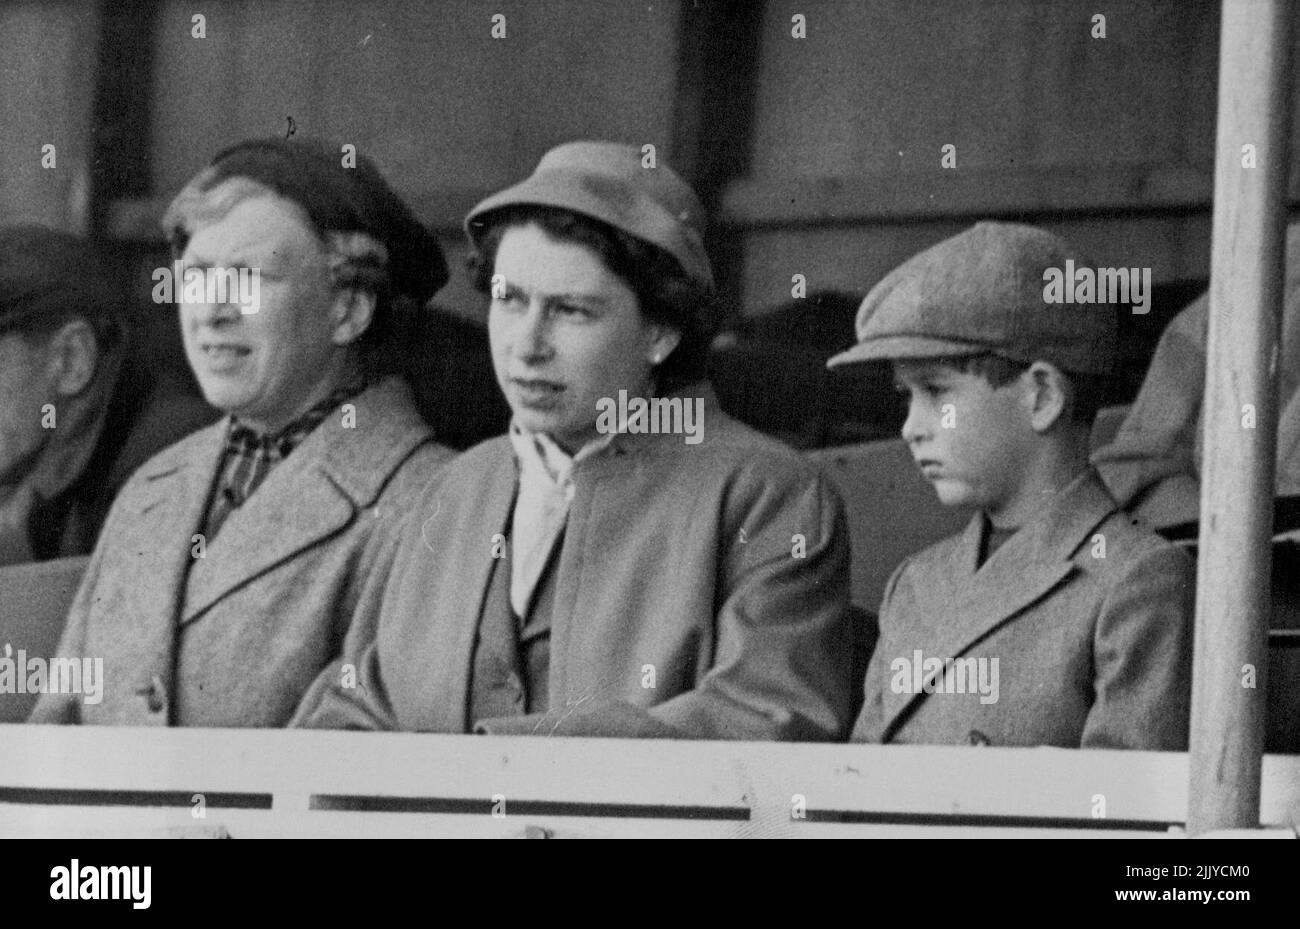 Royal Visitors To The European Horse Trials -- L to R: The Princess Royal; H.M. Queen Elizabeth; and Prince Charles watching the Dressage tests on the 1st day. Many of the world's finest horses and riders - men and women - can be seen in action at the Four day European Horse Trials opened in Windsor Great Park. May 19, 1955. (Photo by Sport & General Press Agency, Limited). Stock Photo